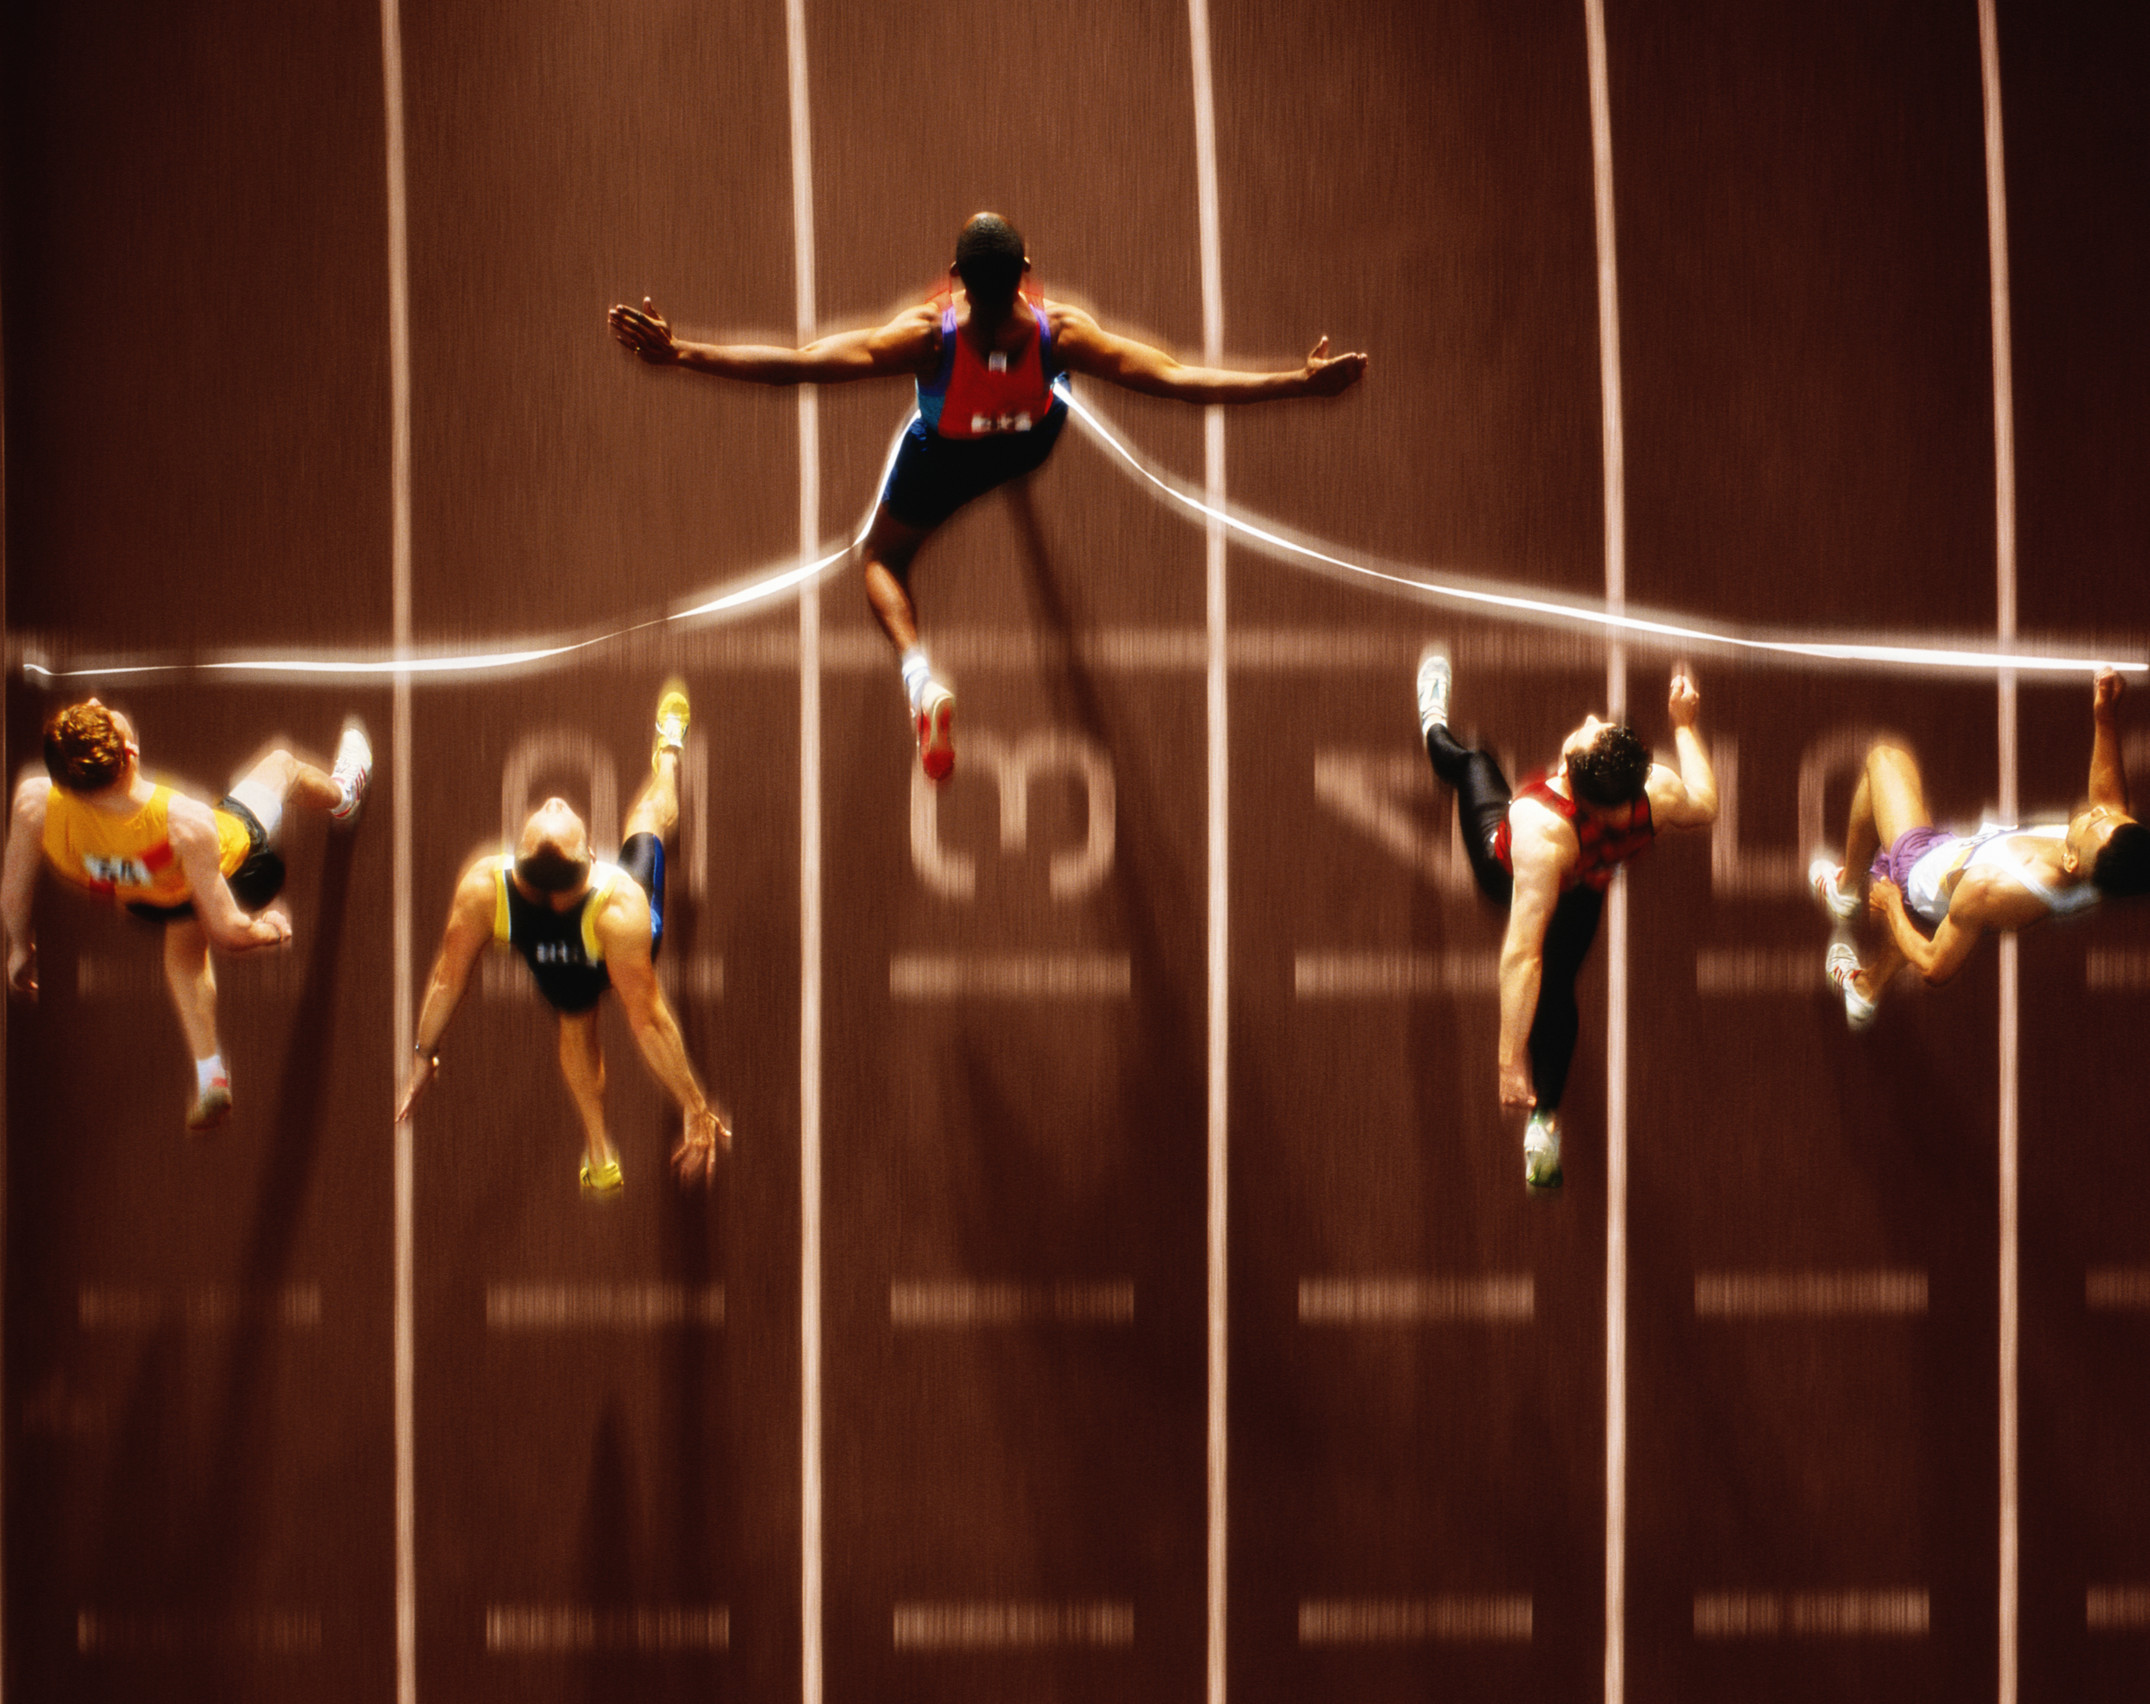 Athletics, runners at finish line, overhead view (Digital Composite)